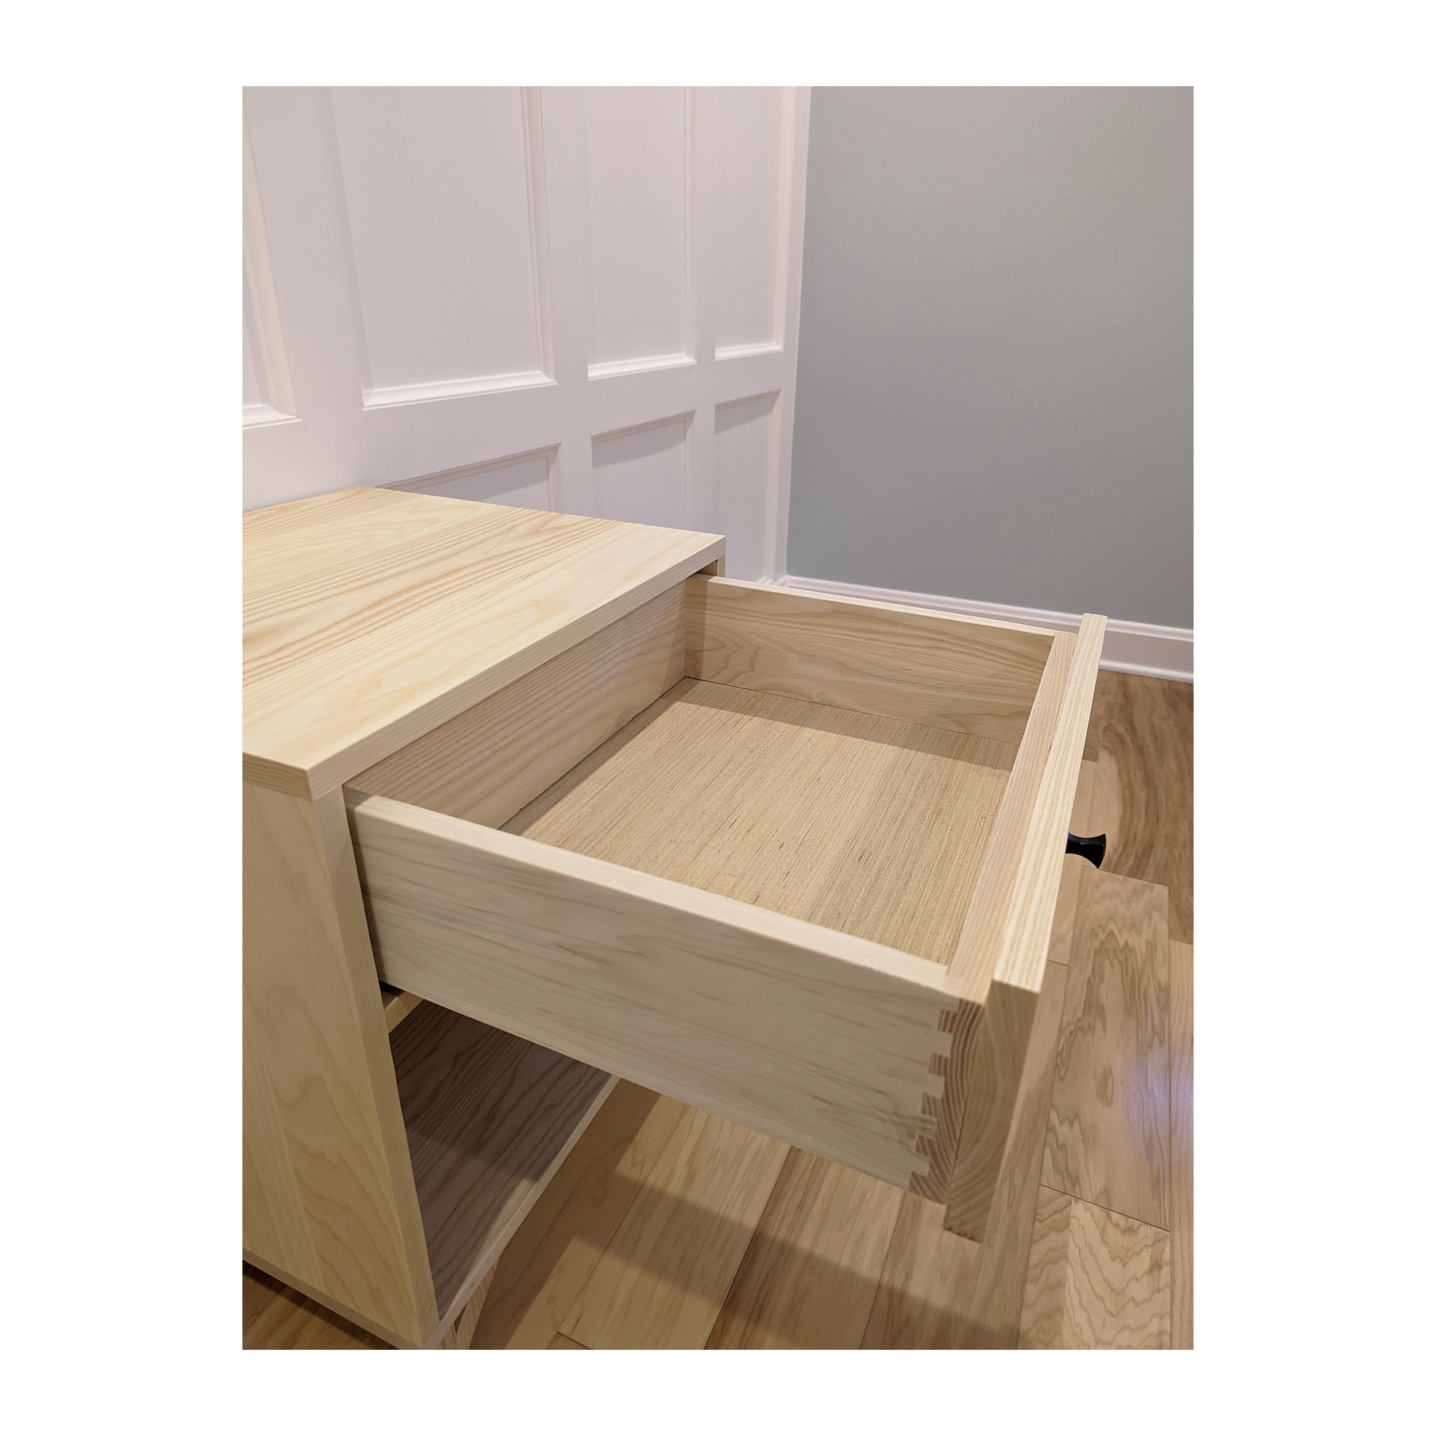 Ash bedside table with ash drawer--Made by 57NorthPlank Tailored Modern Furniture